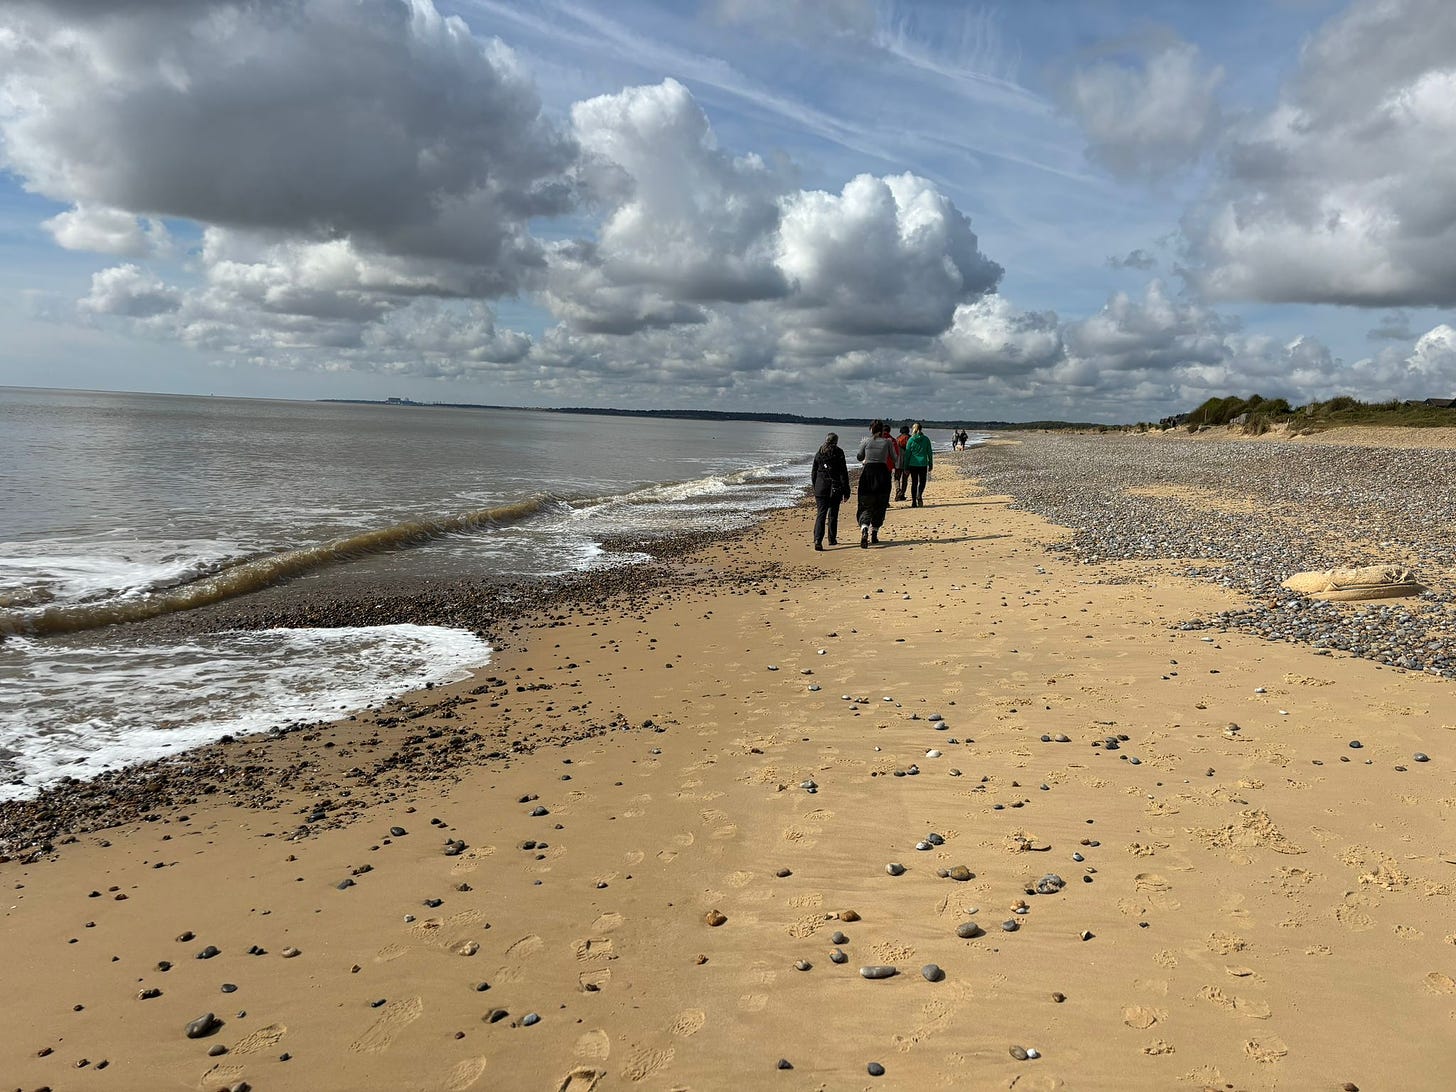 A photo of writers and researchers walking on a beach in Suffolk, talking about their research. The beach has pebbles on it, the waves lap gently at the shore, and the clouds look dramatic.